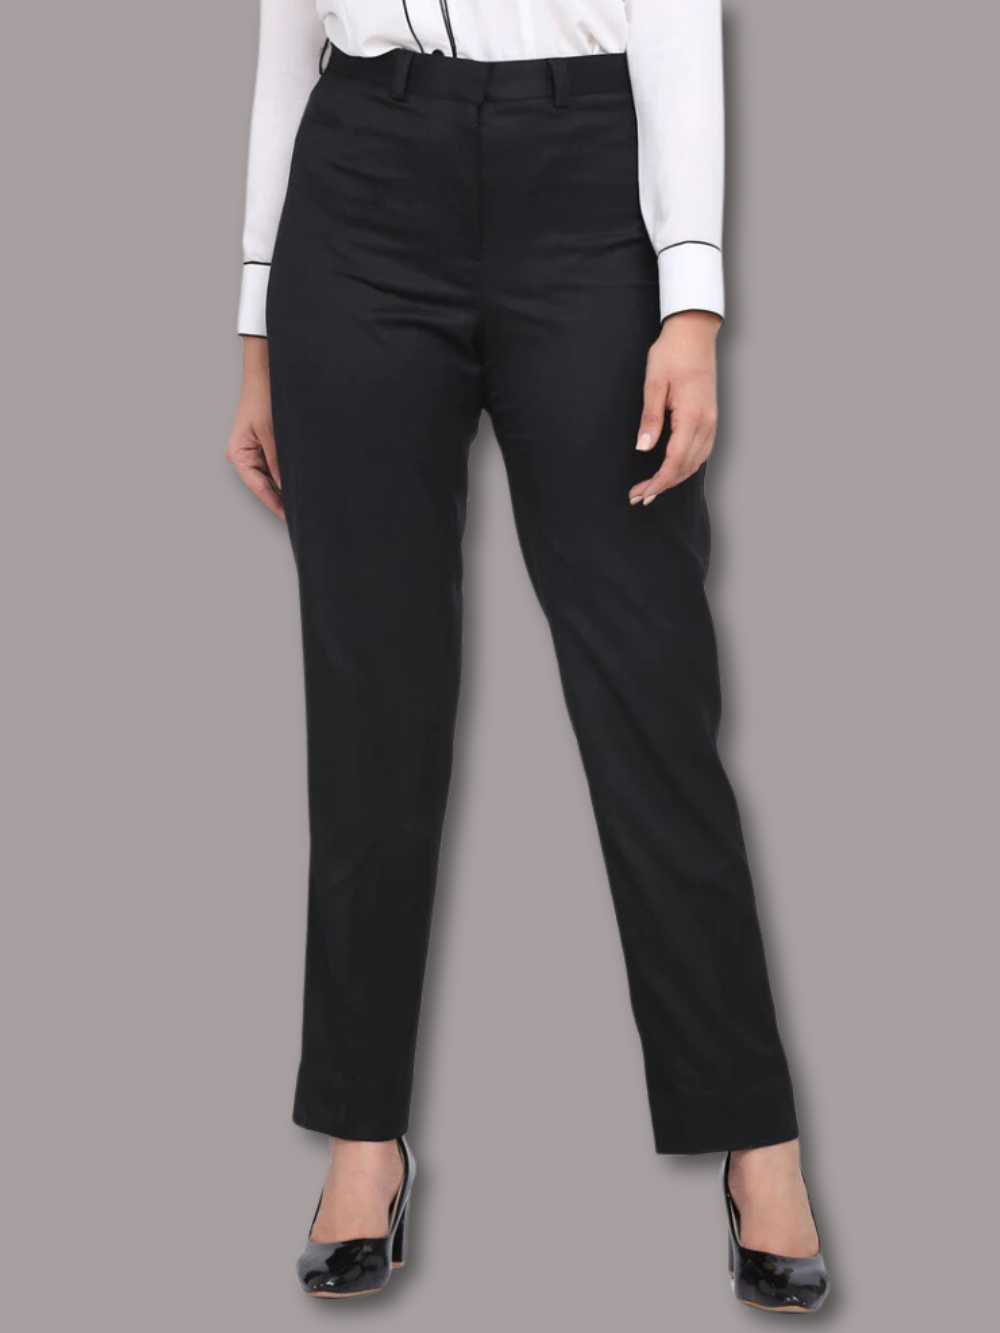 Ladies Formal Trousers at Rs.425/Pcs in delhi offer by Baani Apparels